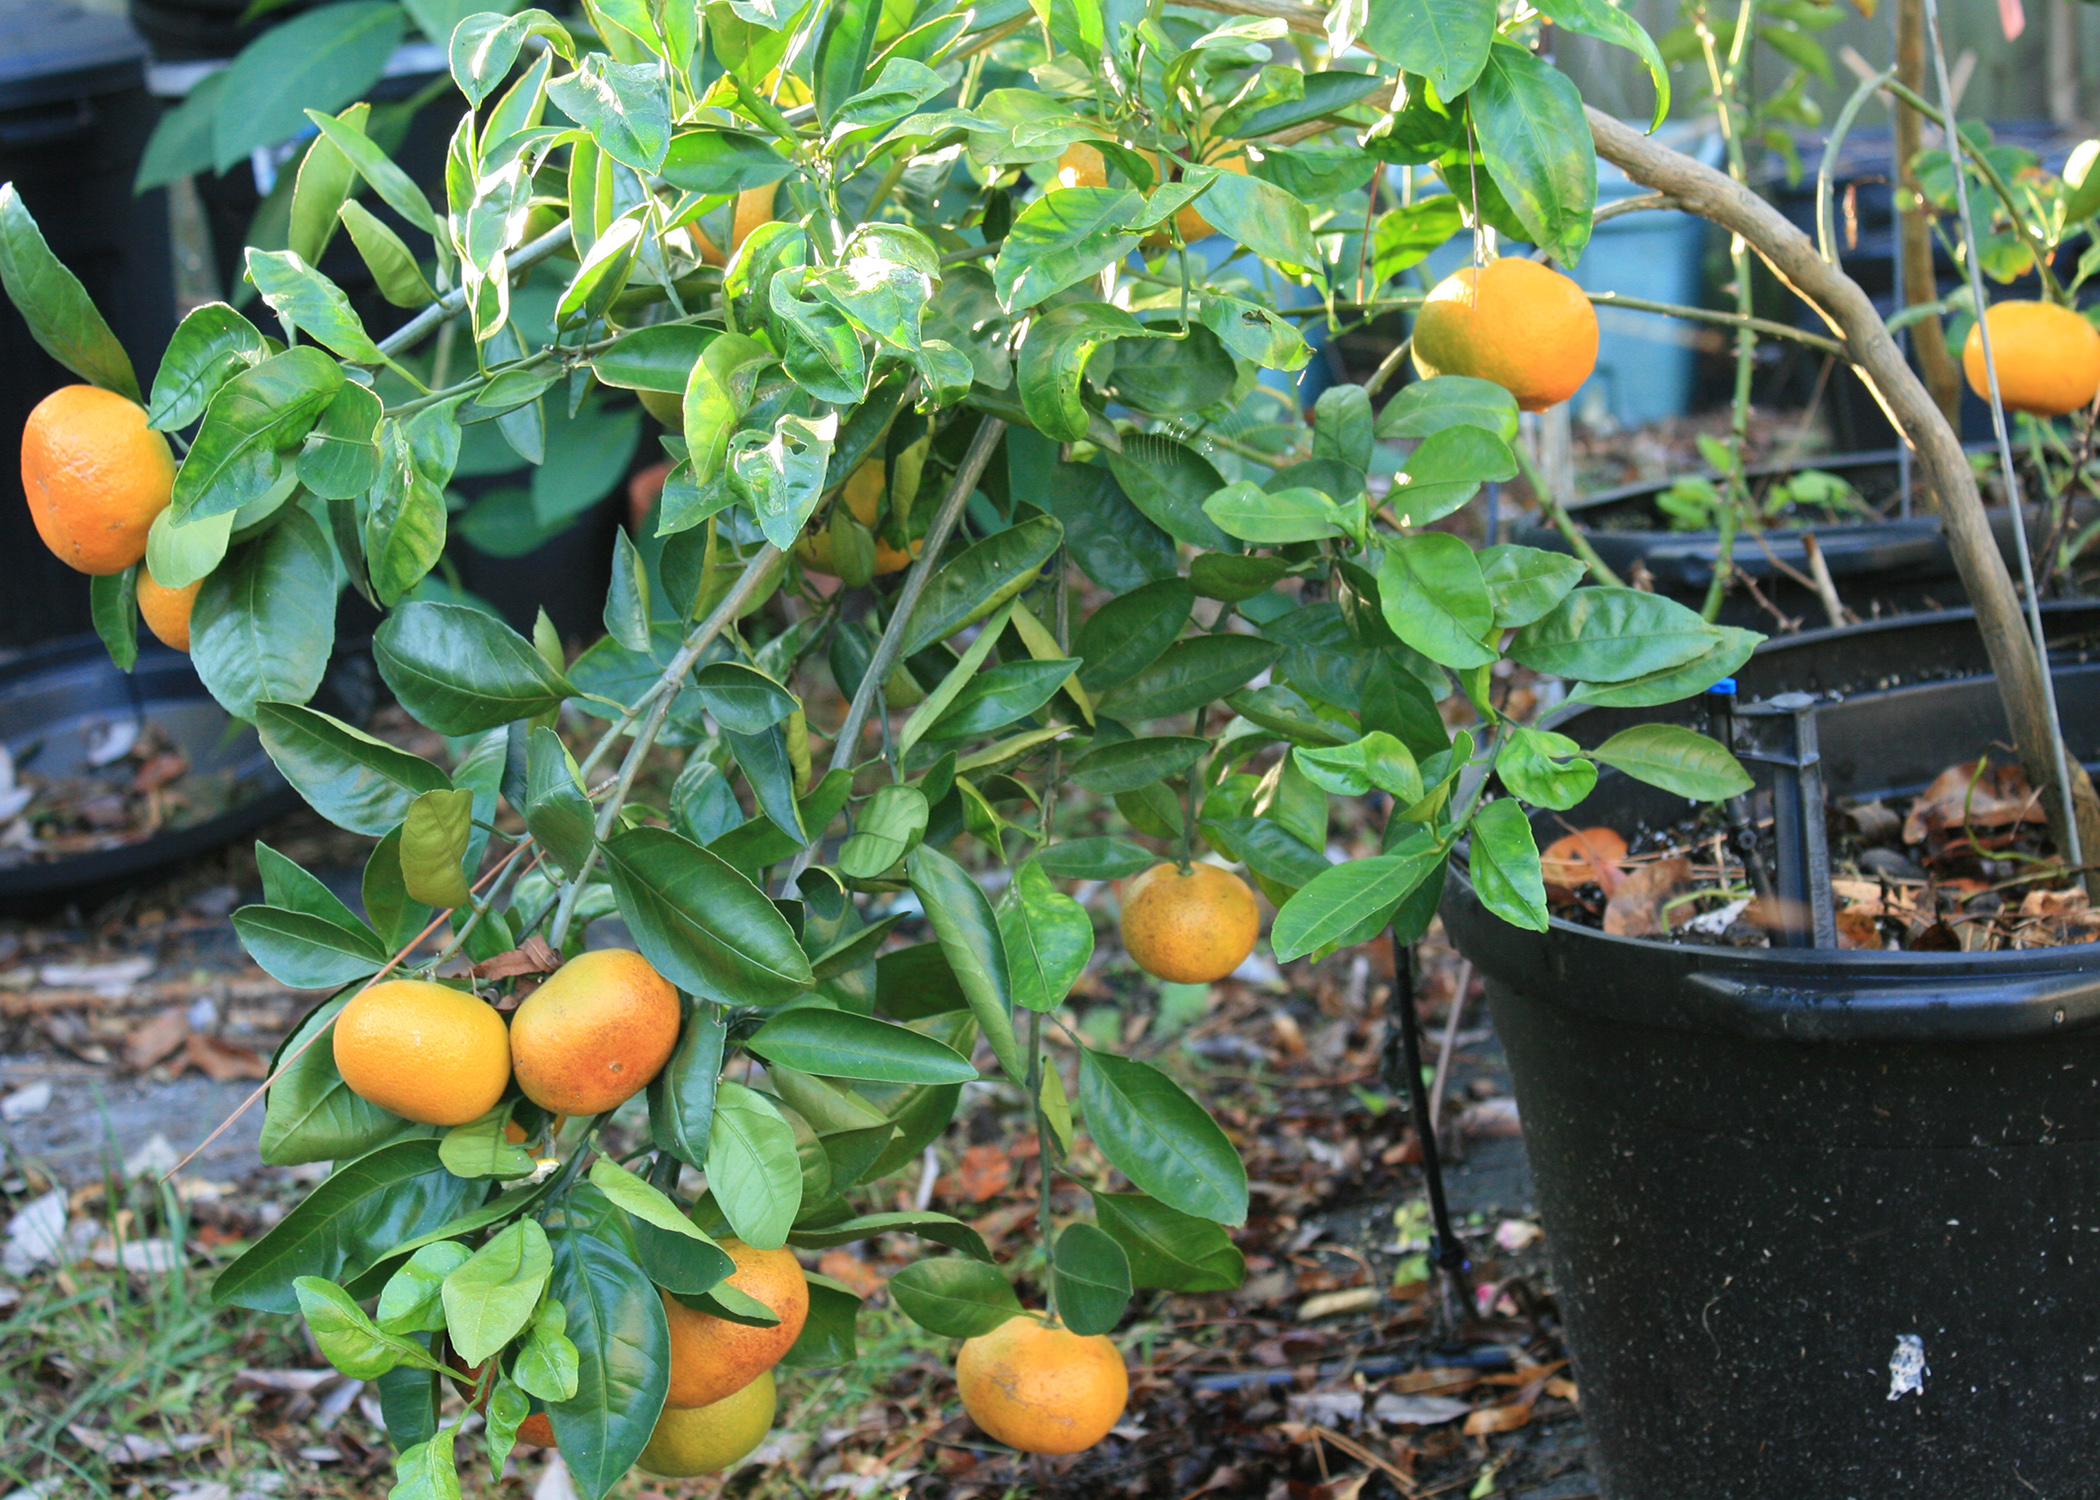 Satsuma oranges are winter favorites that grow well in Mississippi. Their heavy fruit load can overwhelm small trees. (Photo by MSU Extension/Gary Bachman)